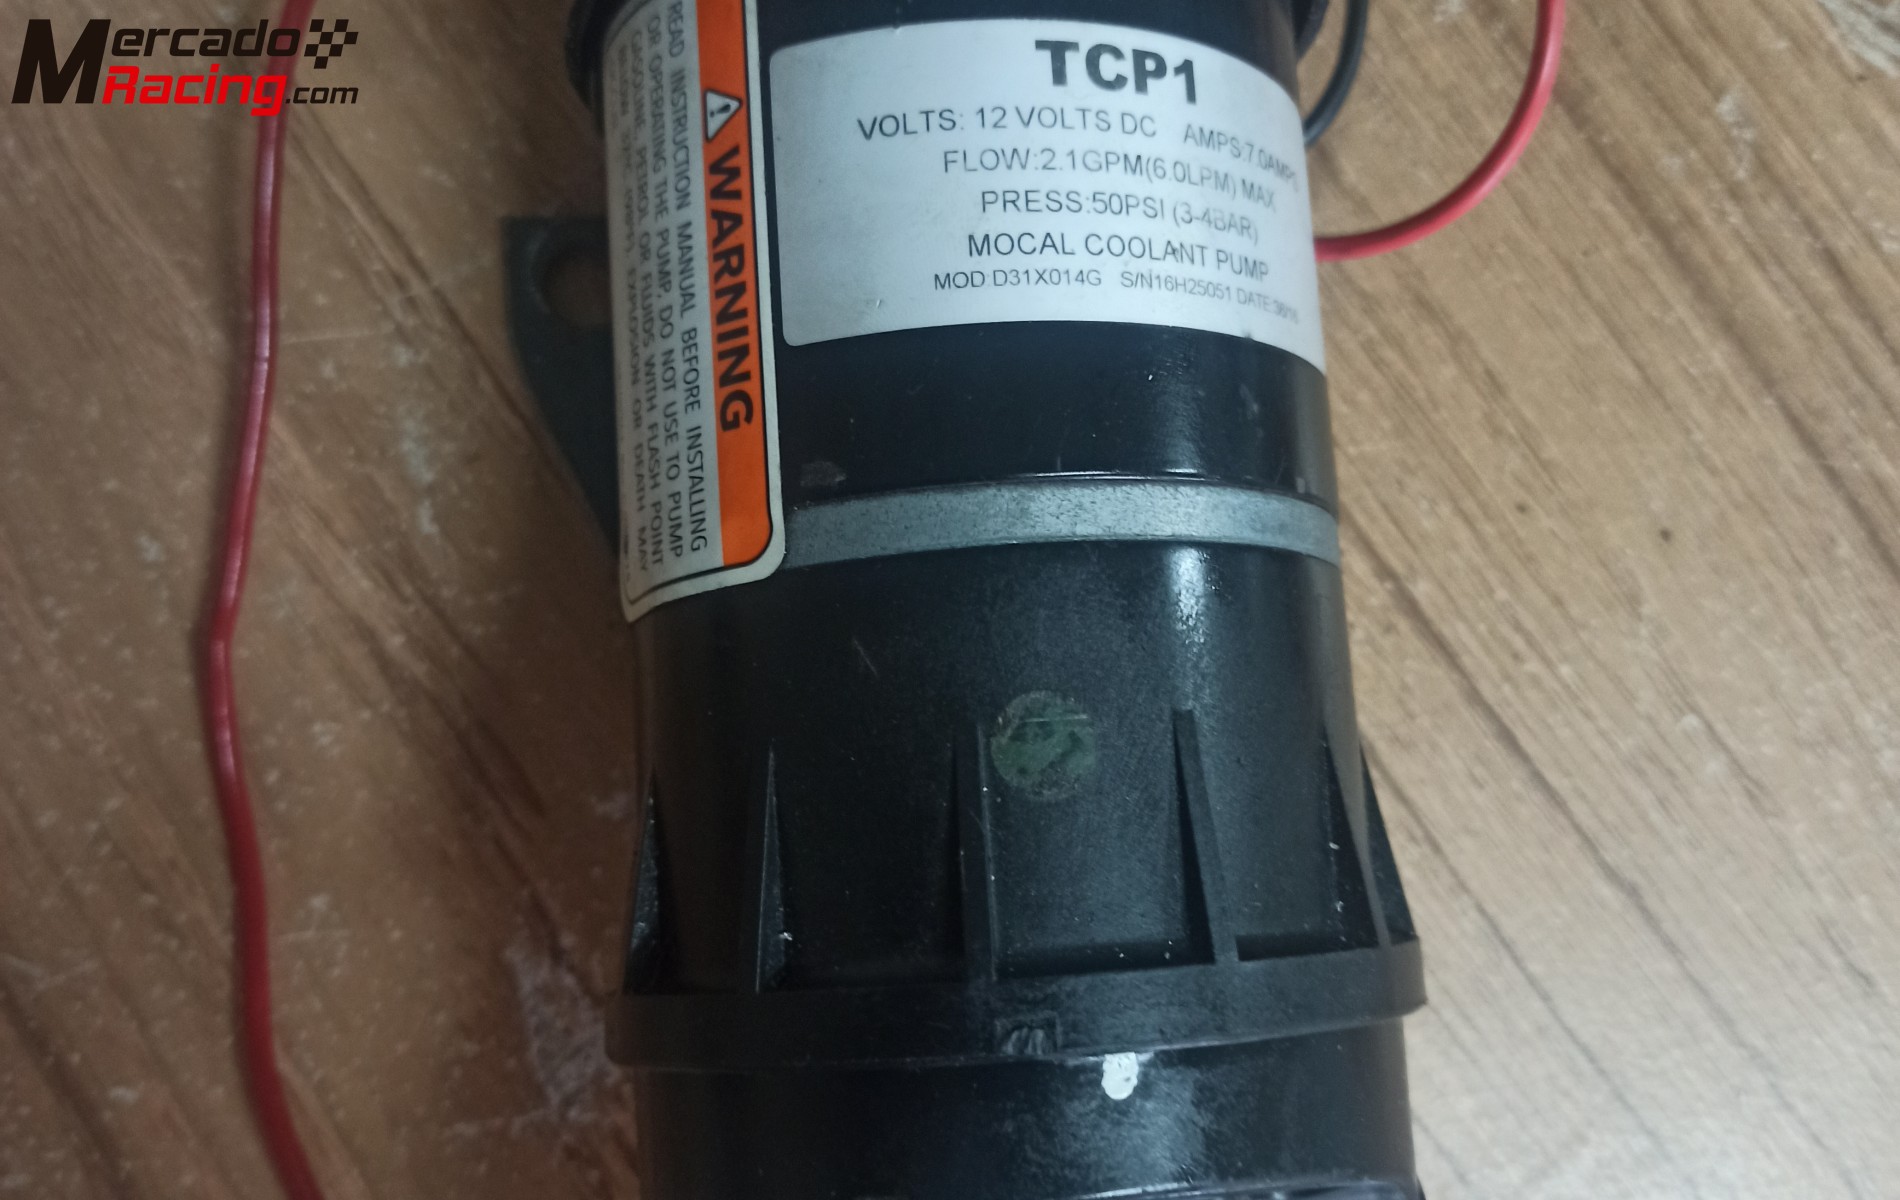 Bomba electrica aceite mocal tcp1